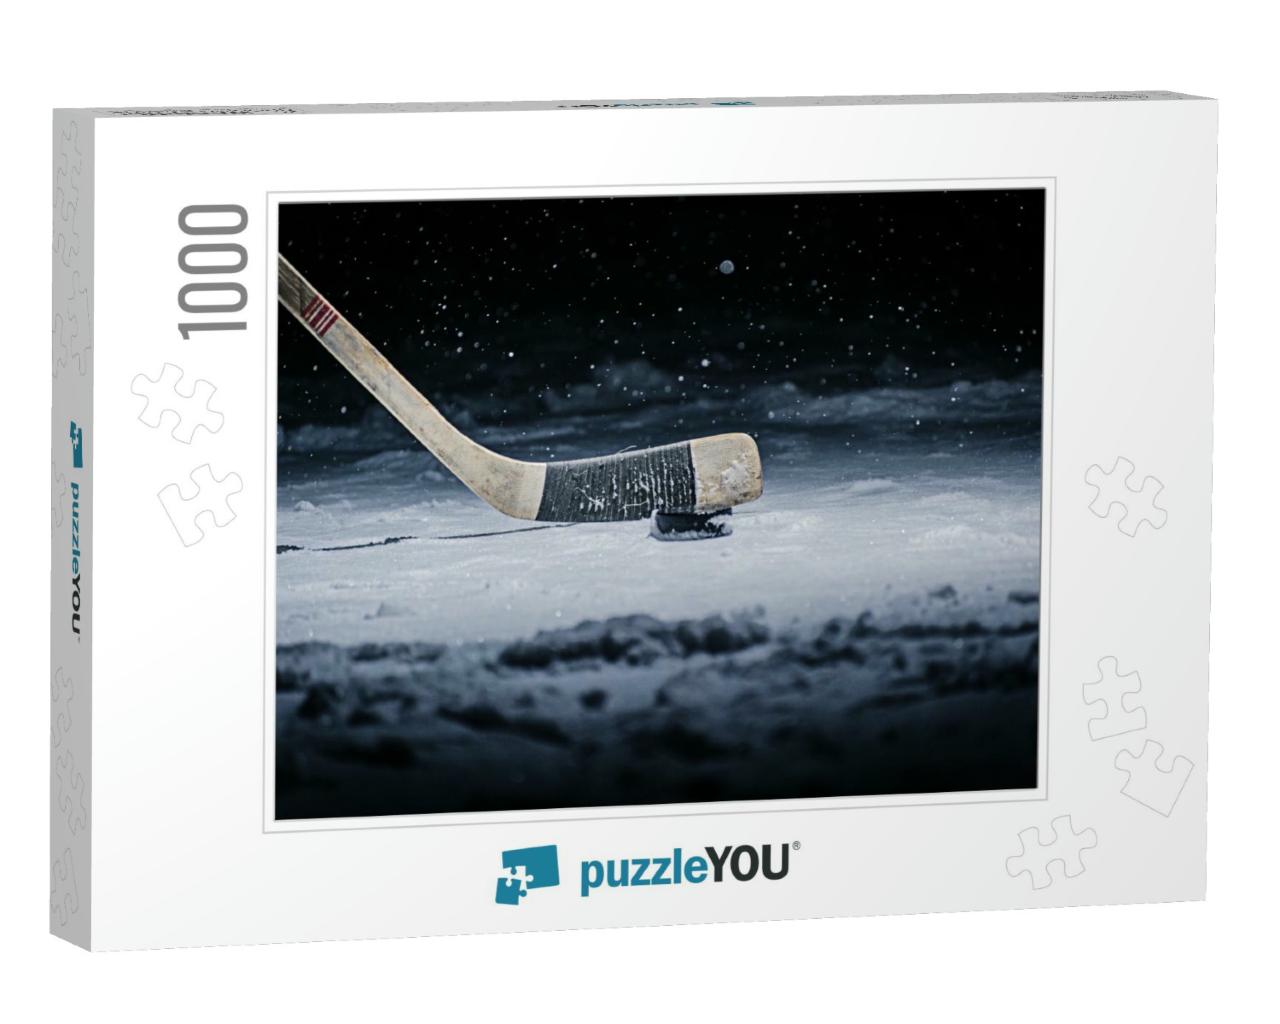 Hockey Stick & Puck on the Ice Rink... Jigsaw Puzzle with 1000 pieces